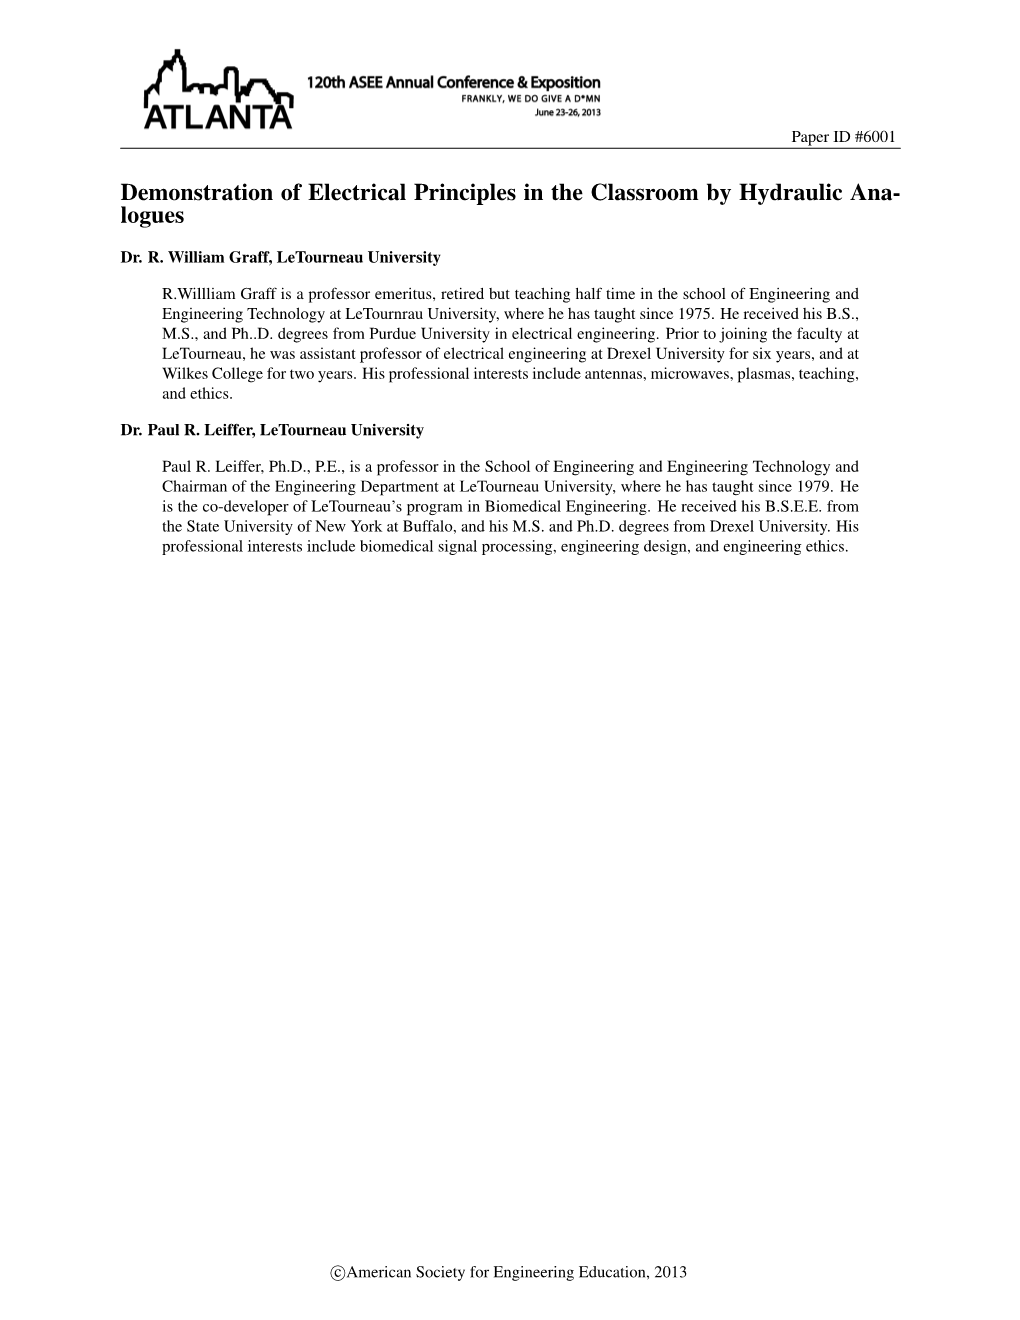 Demonstration of Electrical Principles in the Classroom by Hydraulic Ana- Logues